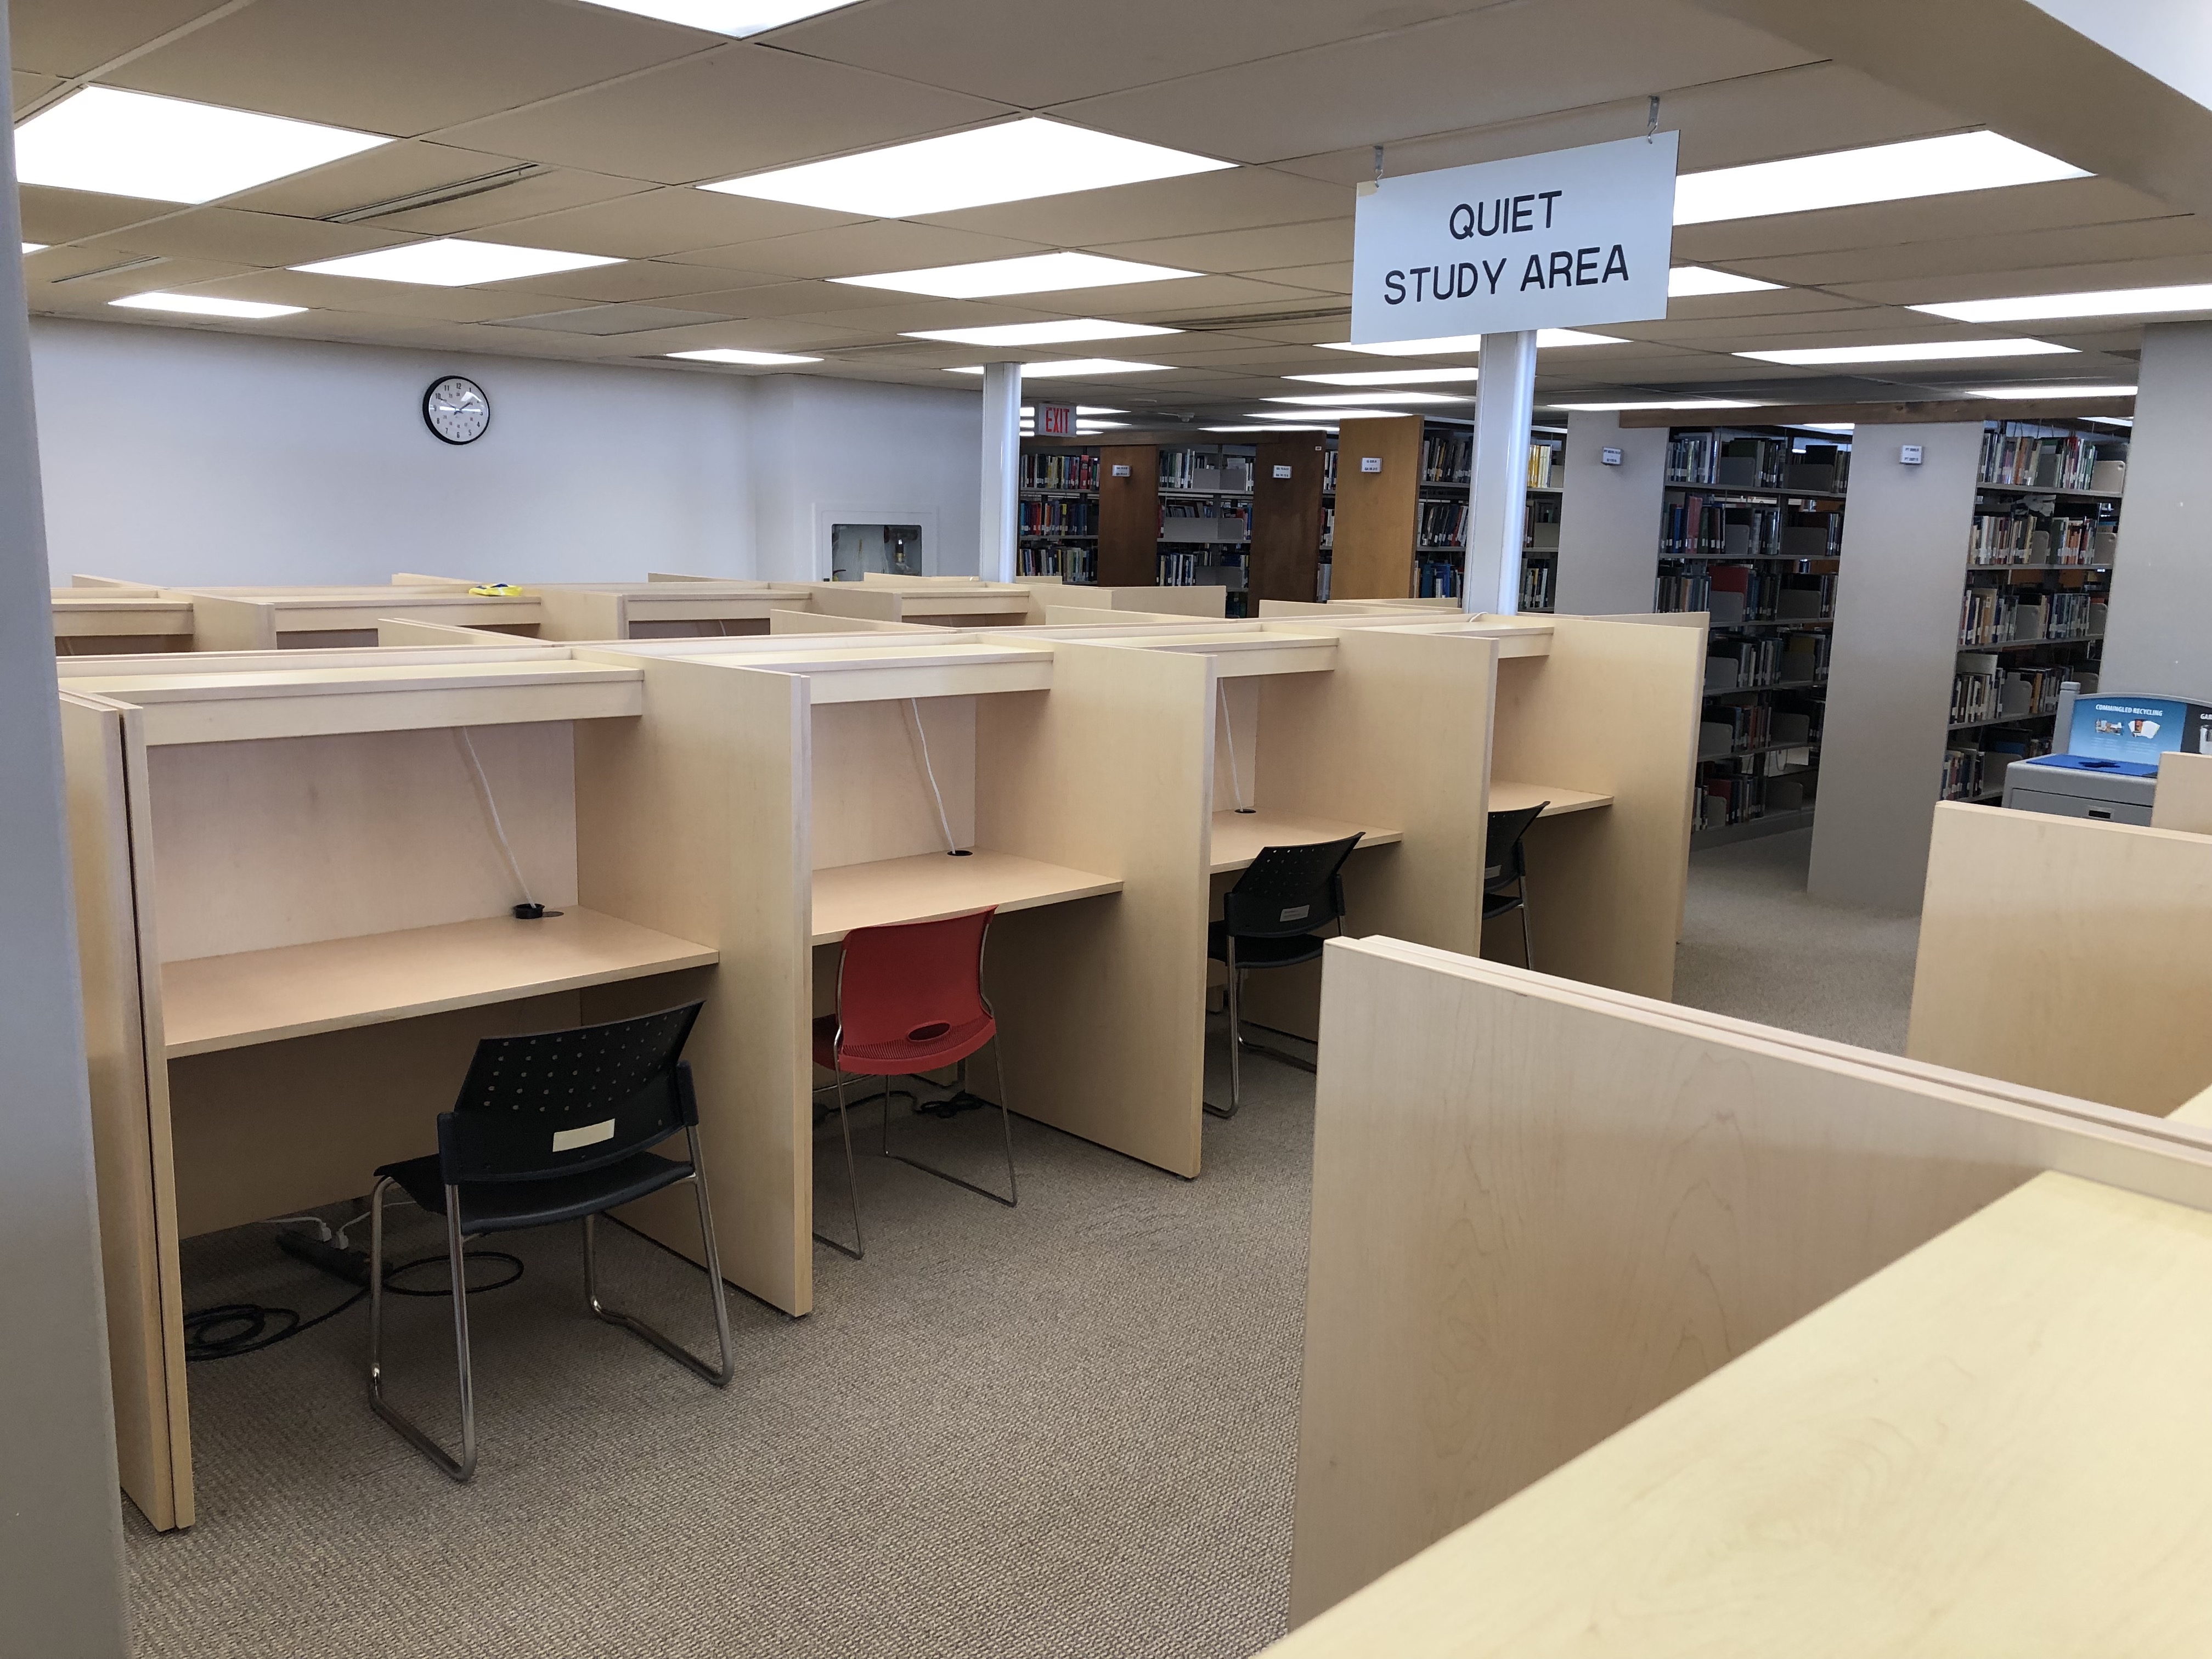 A cluster of about 20 study carrels, grouped into rows of four. The desks surfaces are empty. There are partitions between the desks for privacy. 